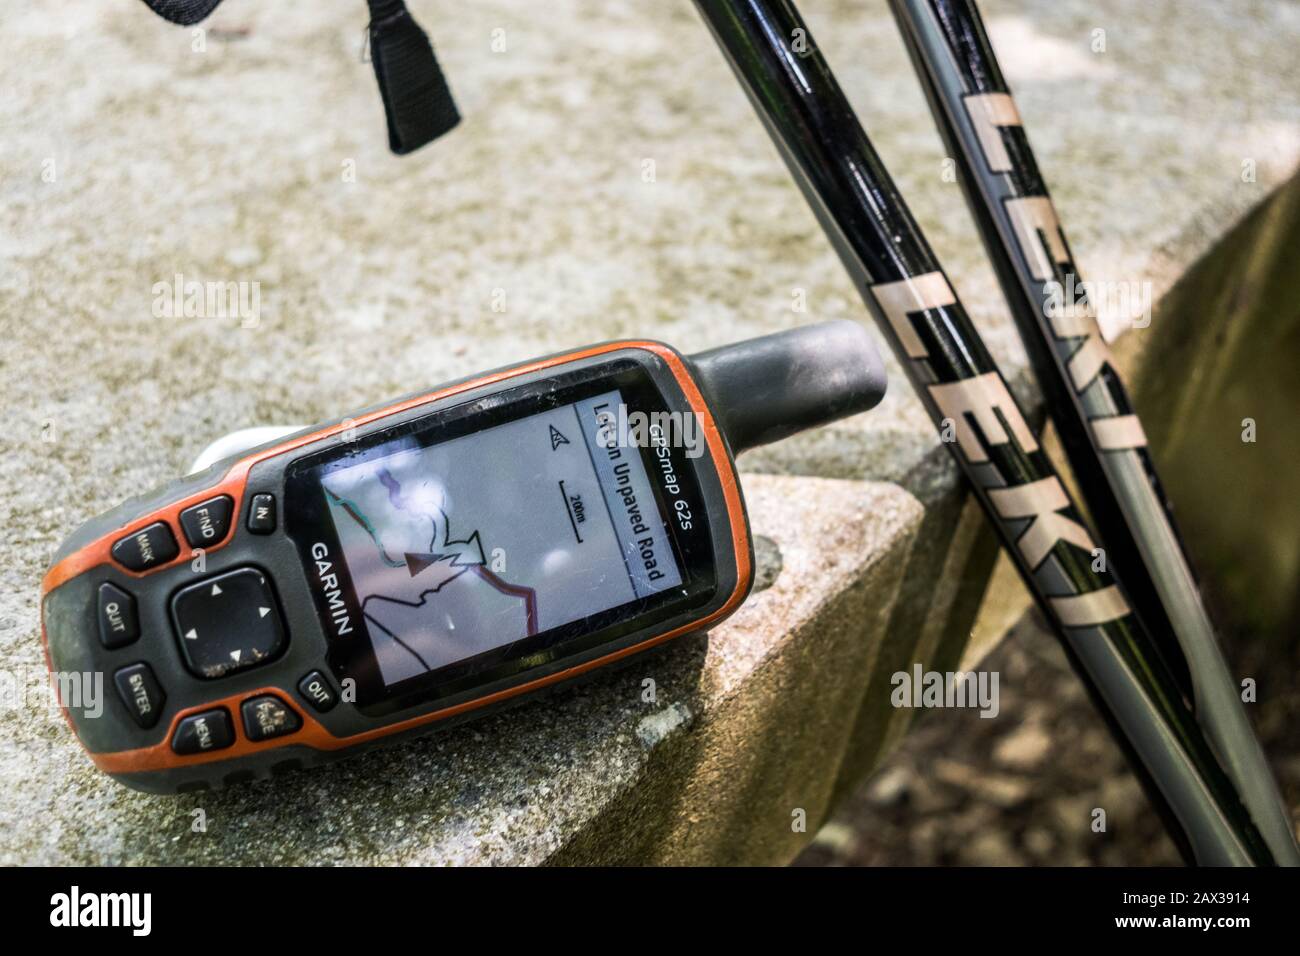 Garmin GPS displaying map giving directions to unpaved road with Leki hiking poles Stock Photo